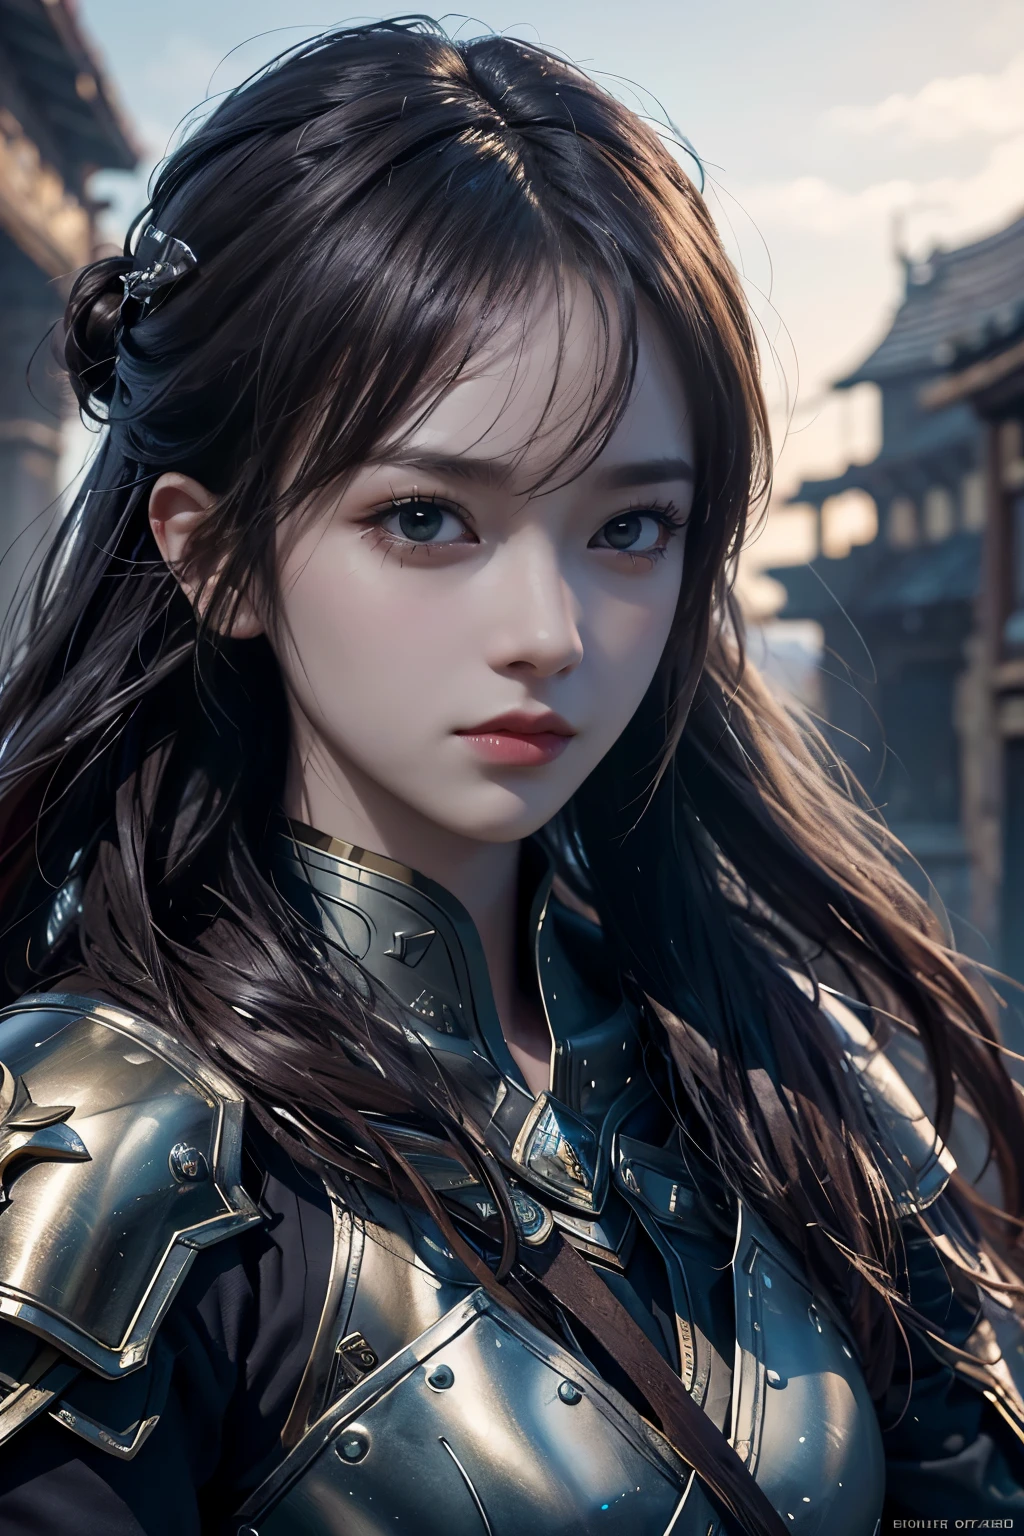 Game art，The best picture quality，Highest resolution，8K，(A bust photograph)，(Portrait)，(Head close-up:1.5)，(Rule of thirds)，Unreal Engine 5 rendering works， (The Girl of the Future)，(Female Warrior)， 
20-year-old girl，((Hunter))，An eye rich in detail，(Big breasts)，Elegant and noble，indifferent，brave，
（Medieval-style fur combat clothing，Glowing magic lines，Animal skin clothing with rich detailedieval Lady Knight，Medieval ranger，
Photo poses，Simple background，Movie lights，Ray tracing，Game CG，((3D Unreal Engine))，oc rendering reflection pattern